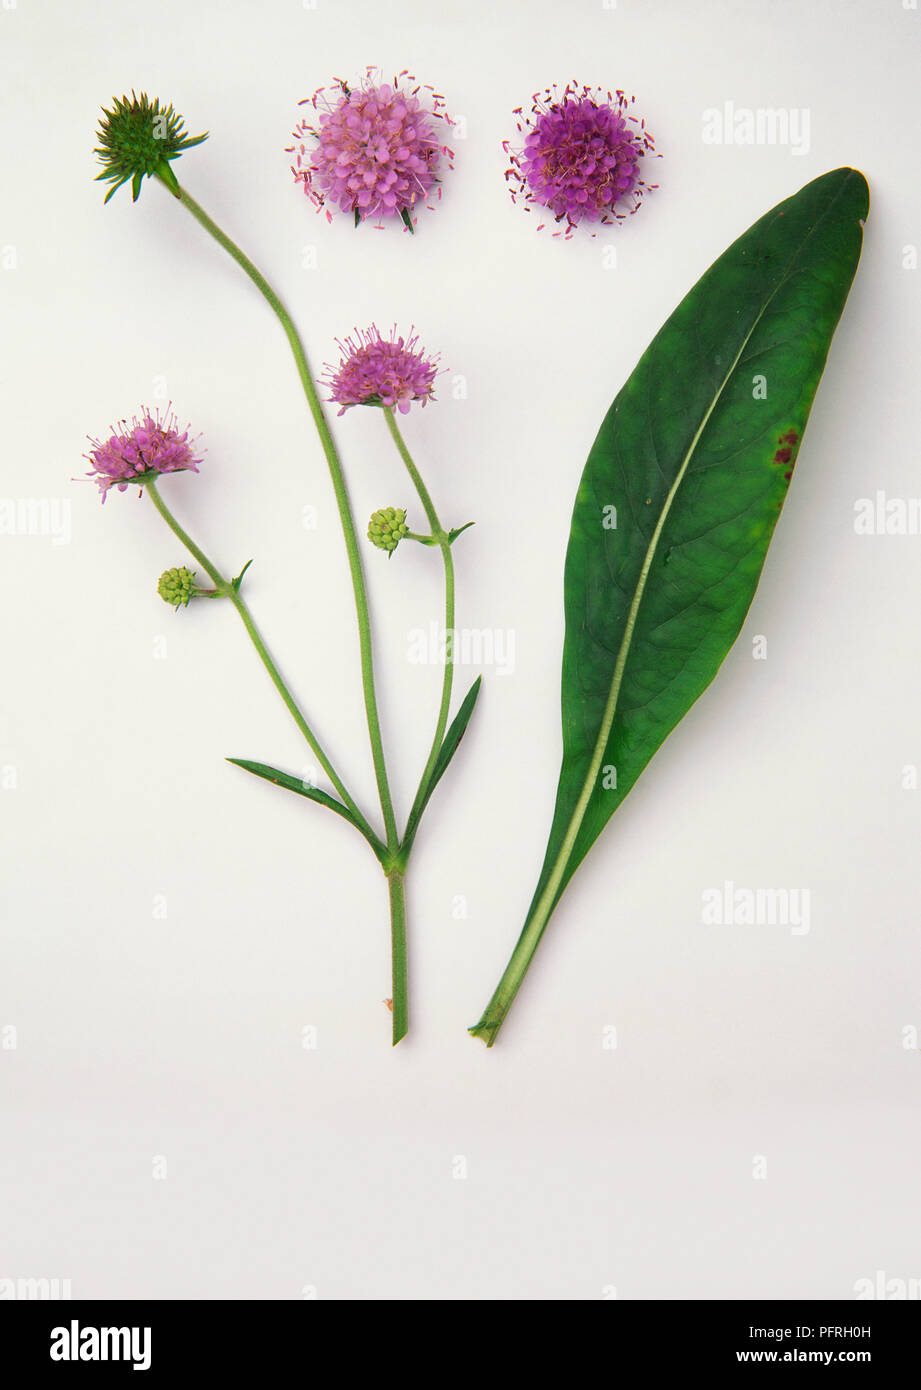 Succisa pratensis (Devil's-bit, Devil's-bit scabious), stems with pink flowers, and a leaf Stock Photo